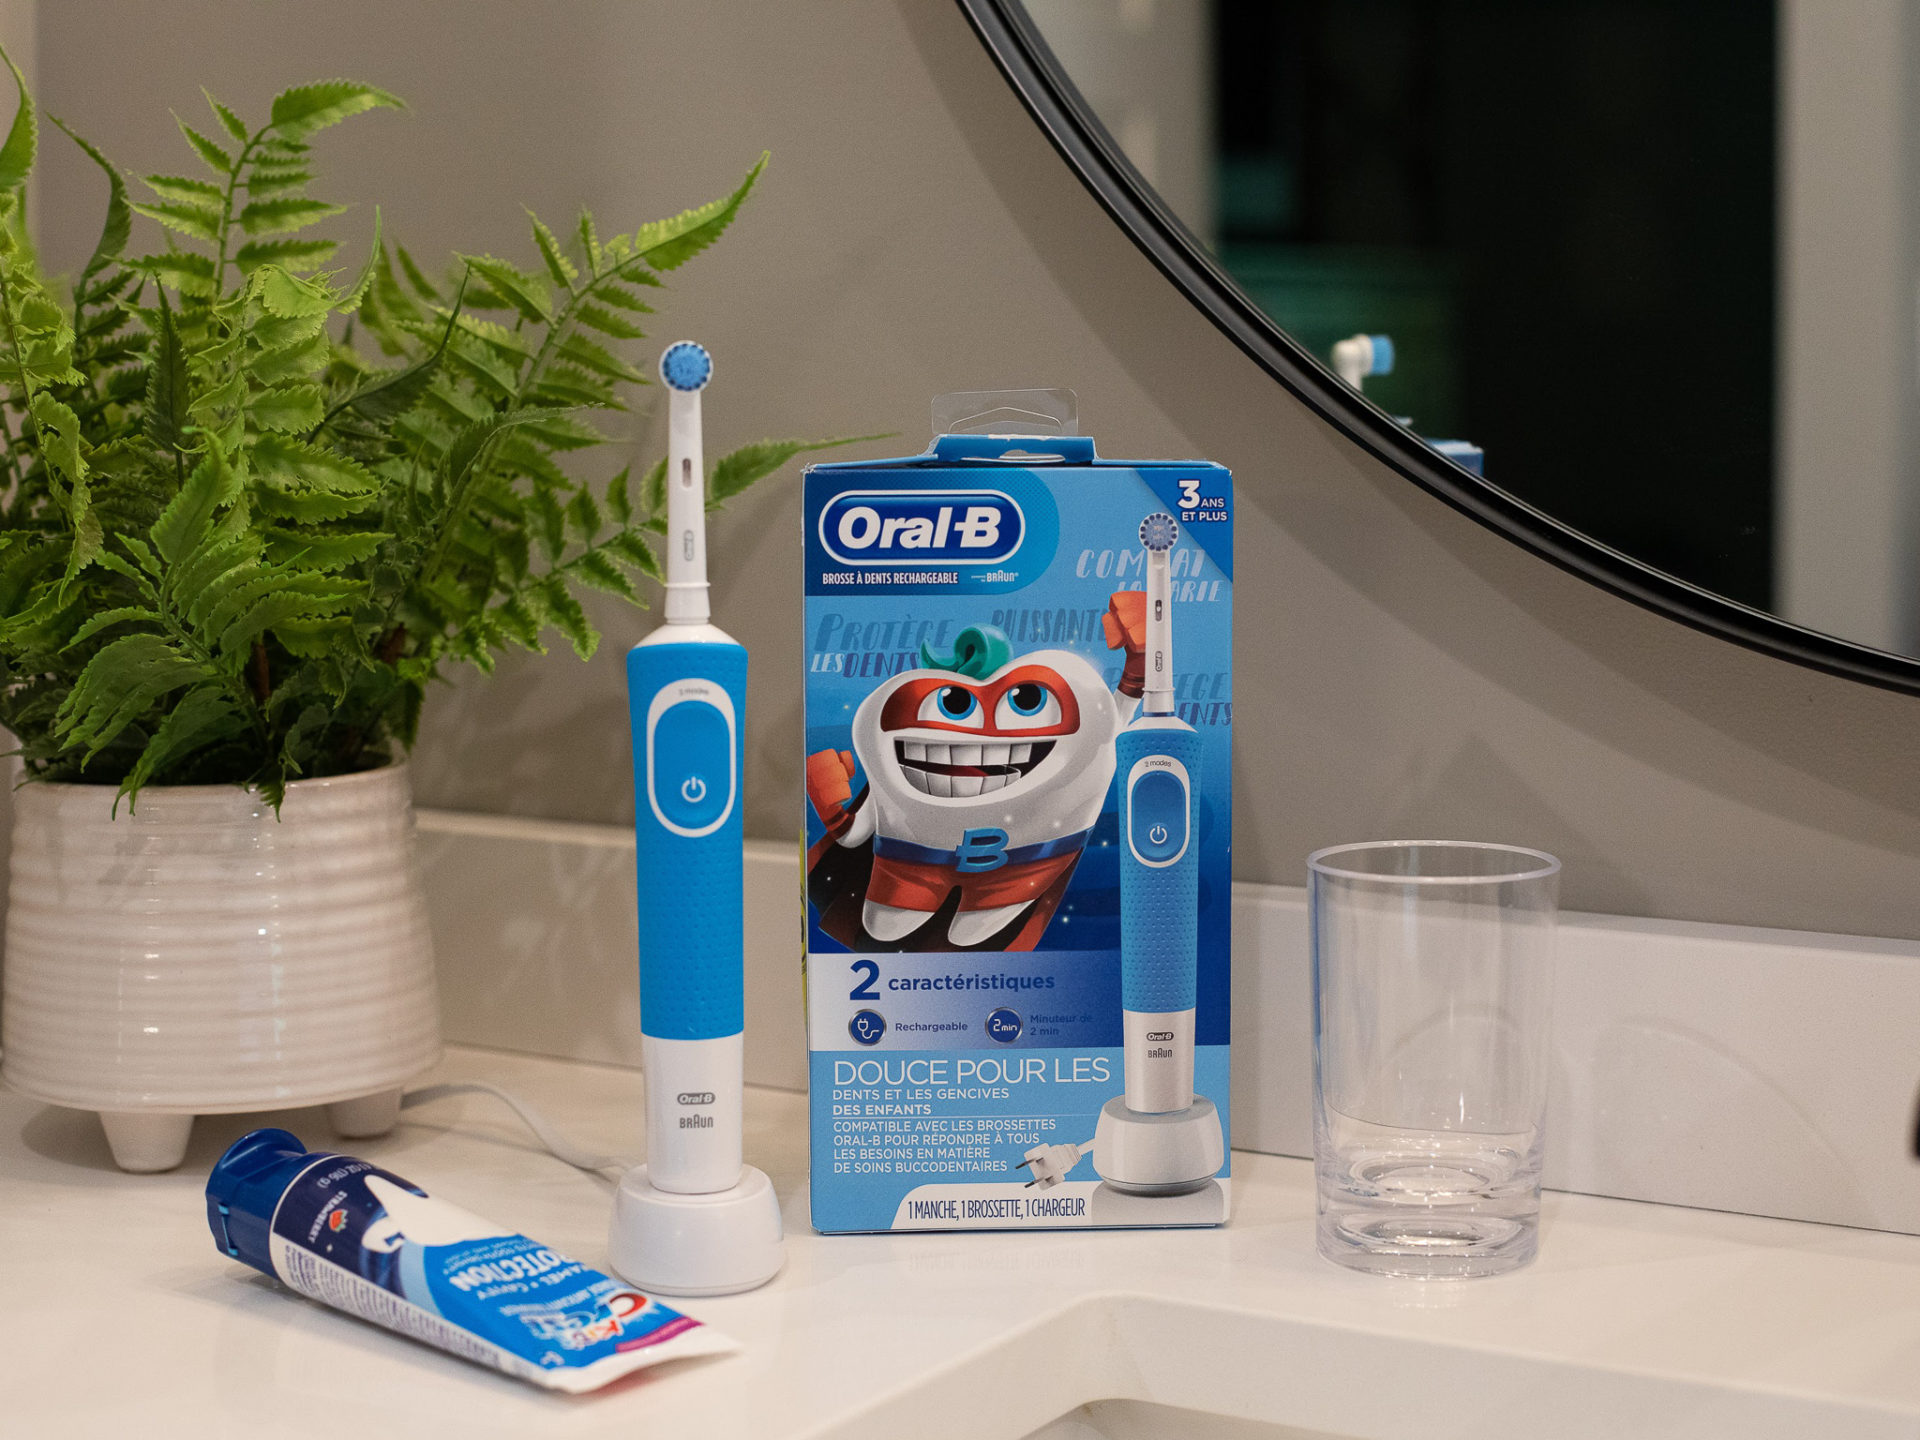 Oral-B Kids Rechargeable Electric Toothbrush As Low As $14.99 At Kroger – Half Price!